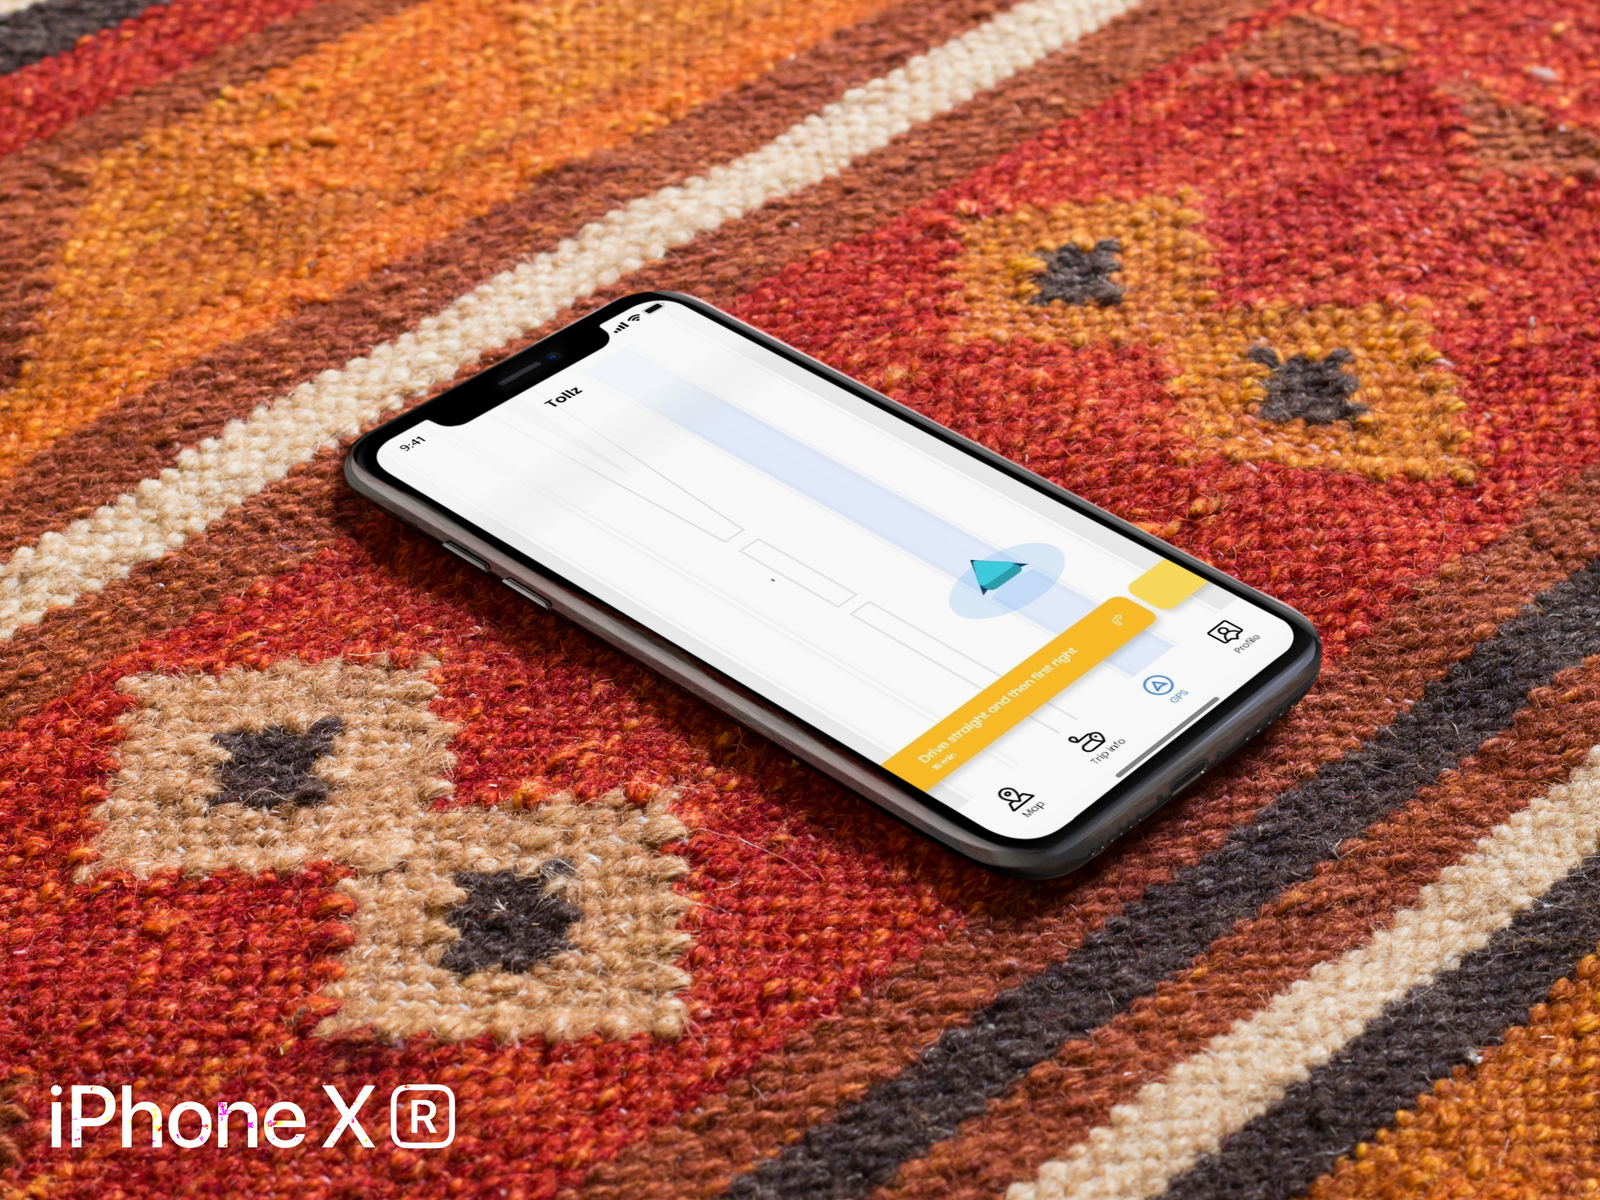 Iphone XR Mockup Lying On A Red Carpet